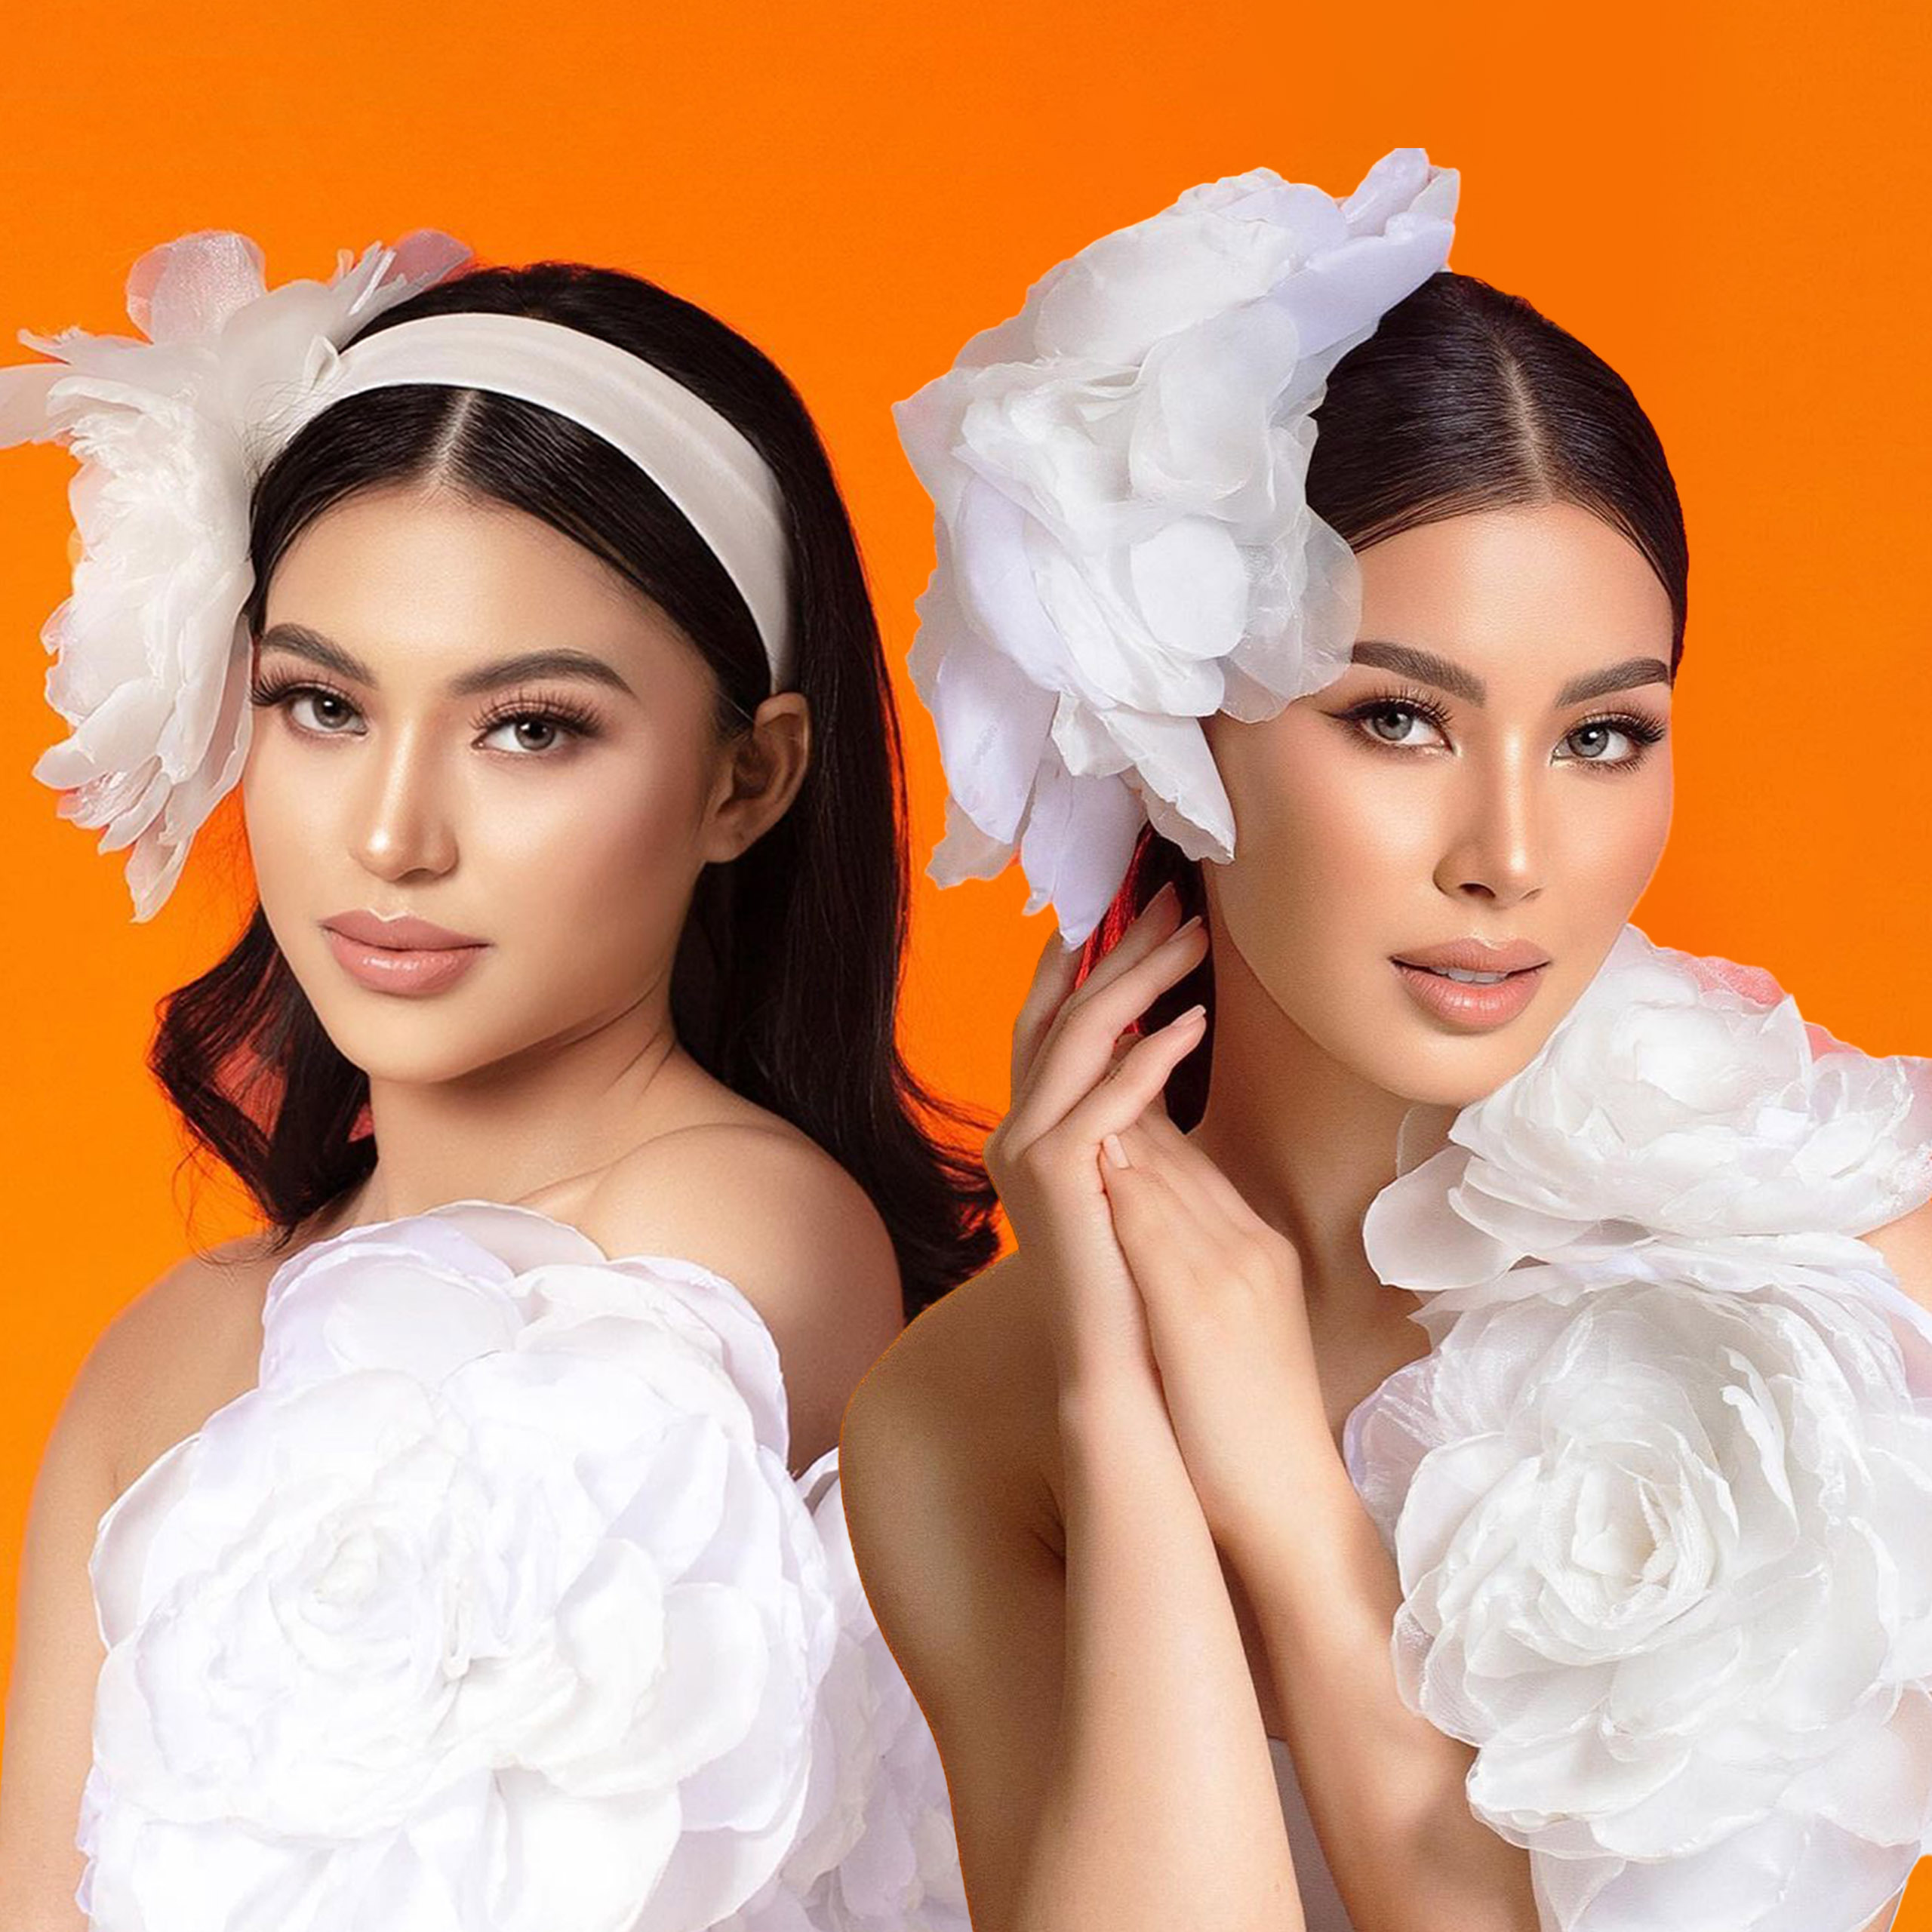 7 Binibining Pilipinas 2023 Candidates With Standout Advocacies